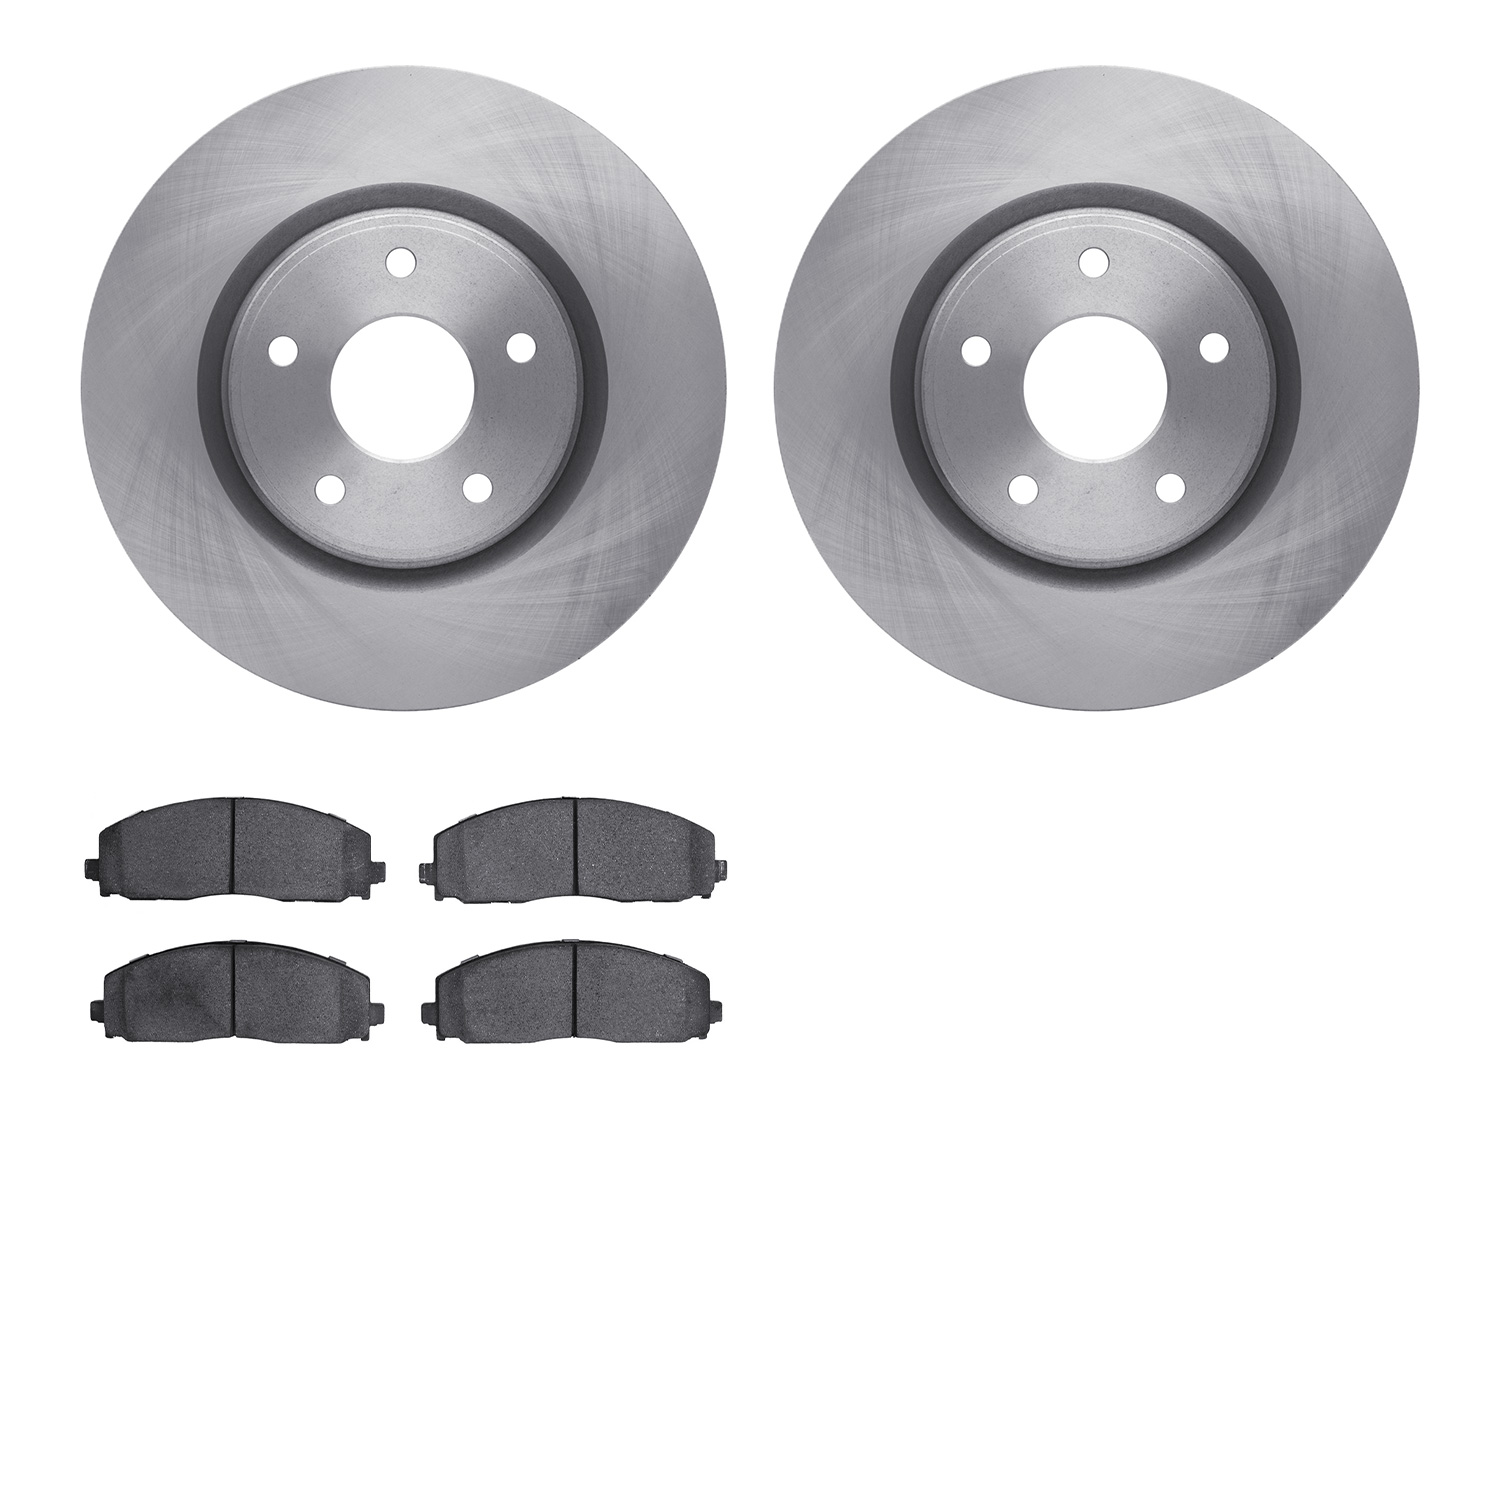 6402-40067 Brake Rotors with Ultimate-Duty Brake Pads, Fits Select Multiple Makes/Models, Position: Front